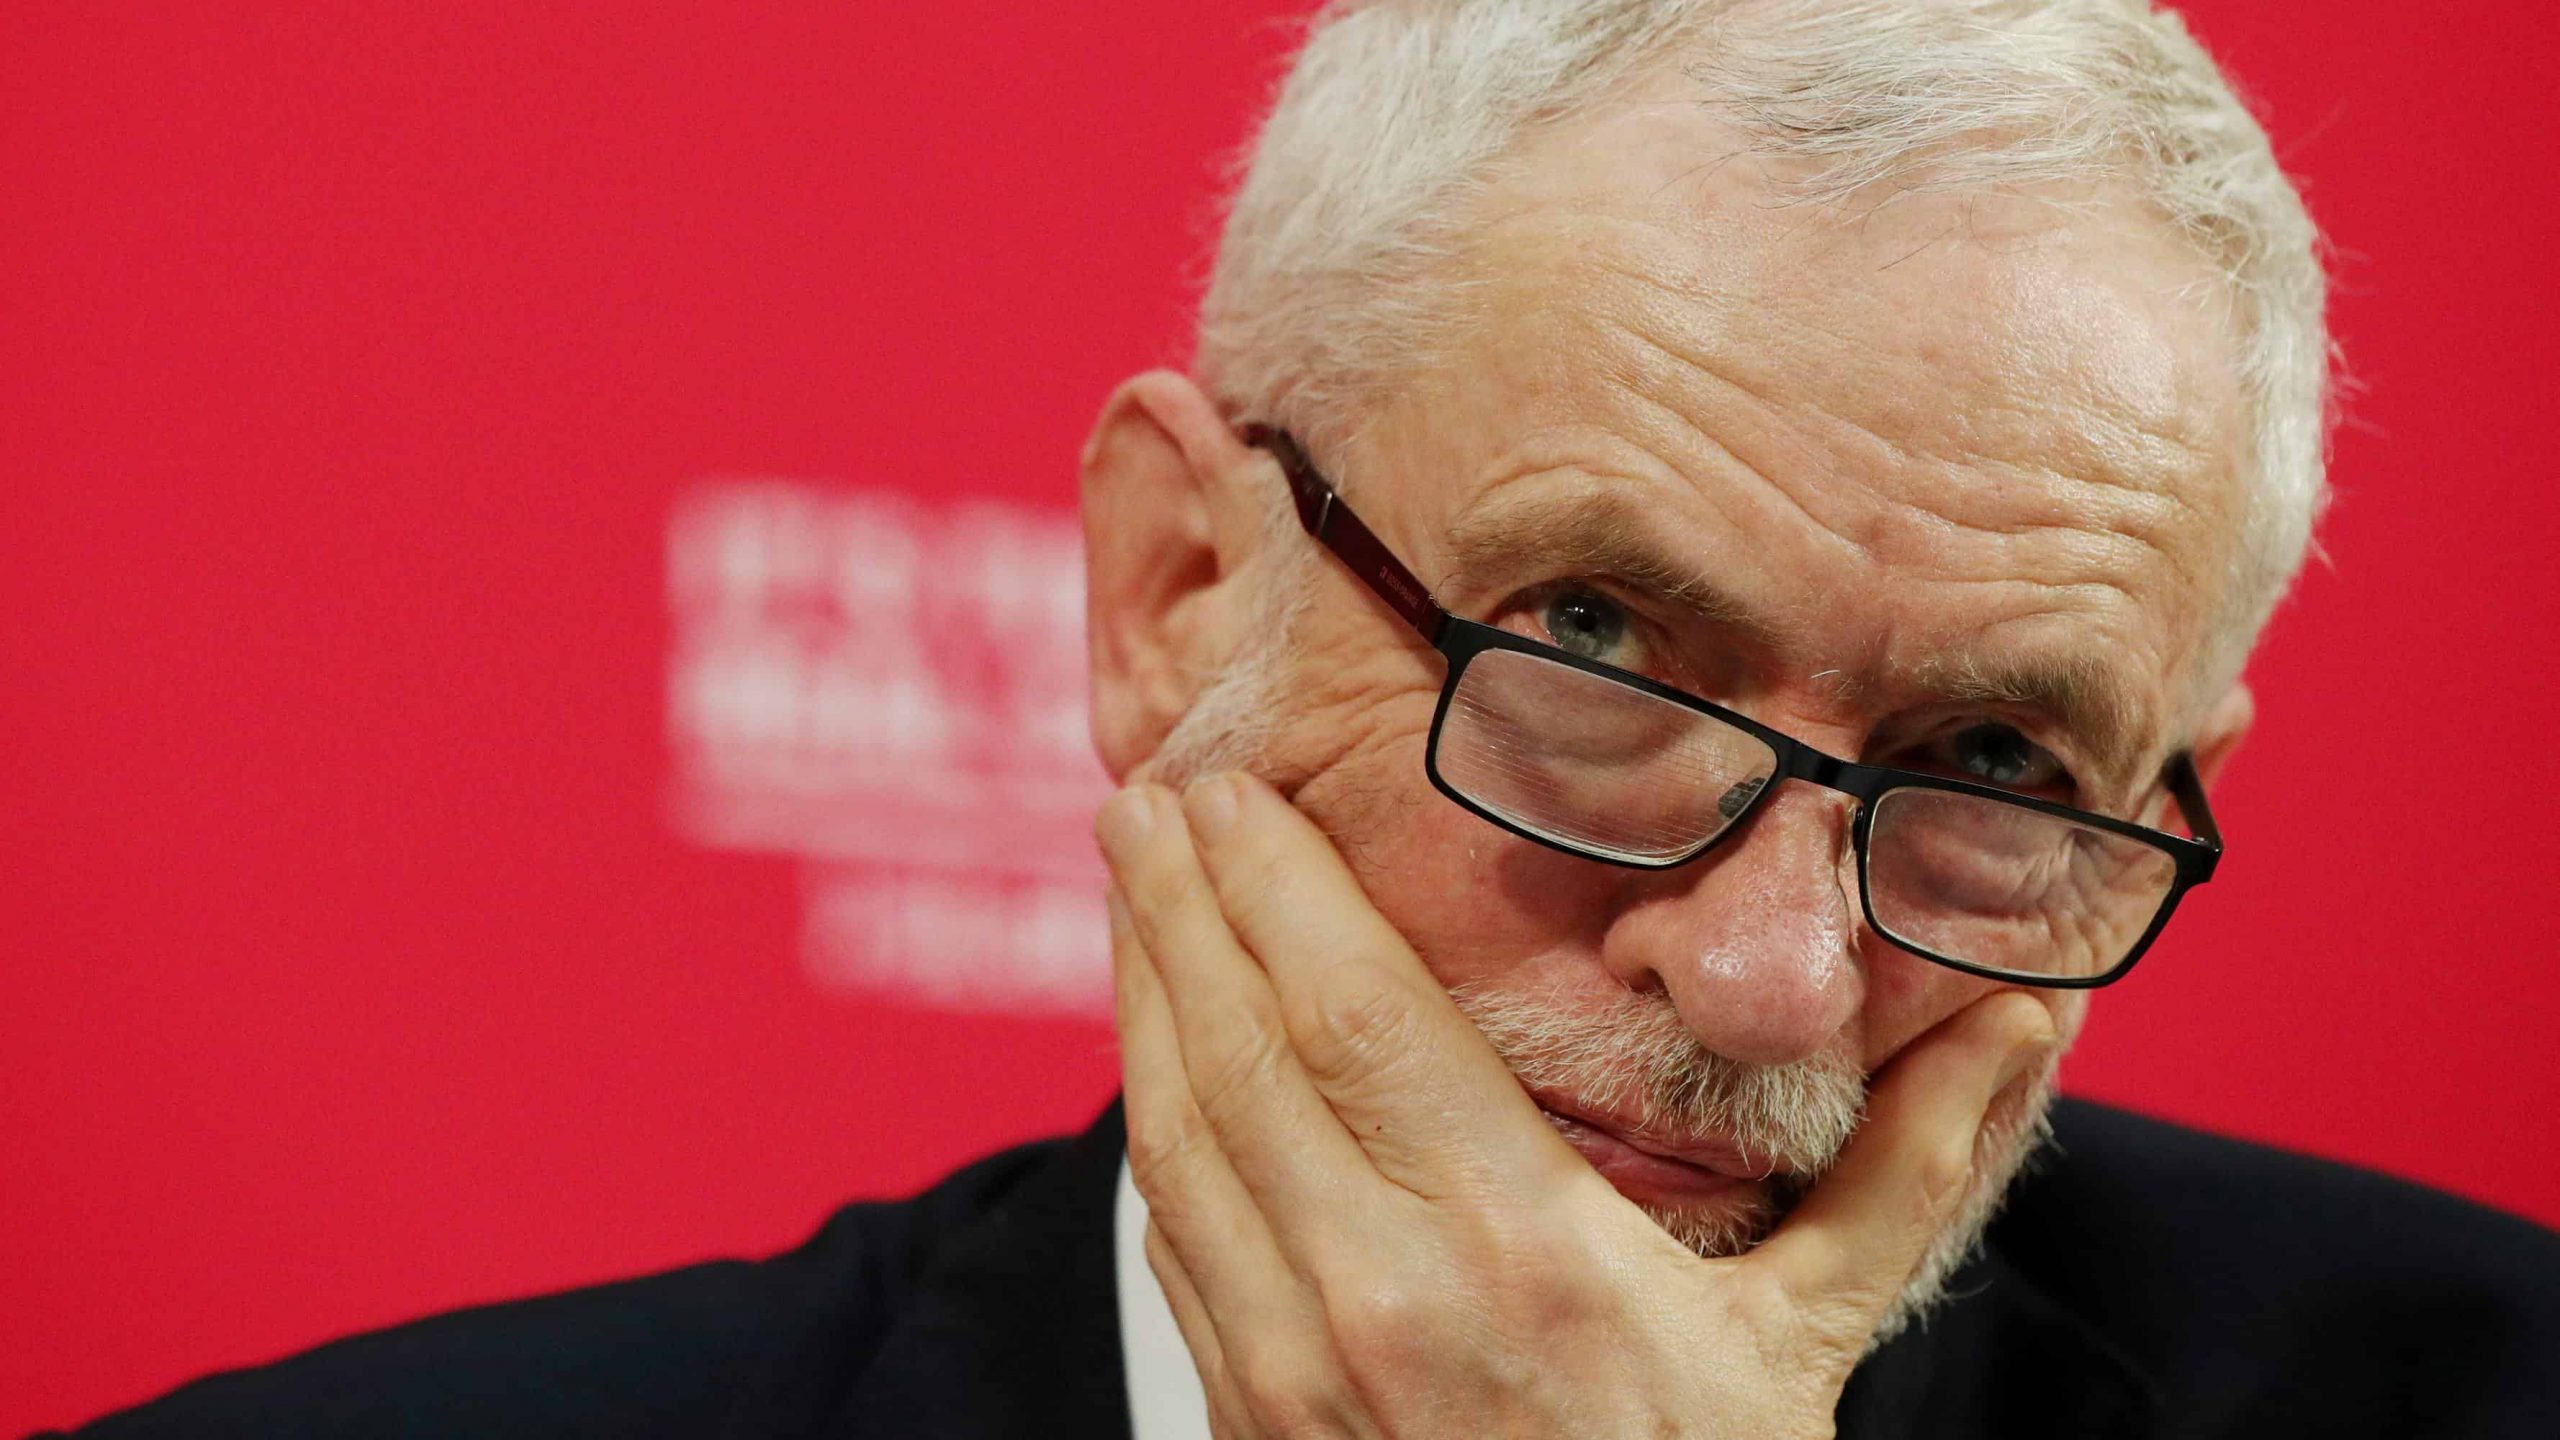 Corbyn says government response to COVID-19 proves he was “absolutely right” about public spending in 2019 general election